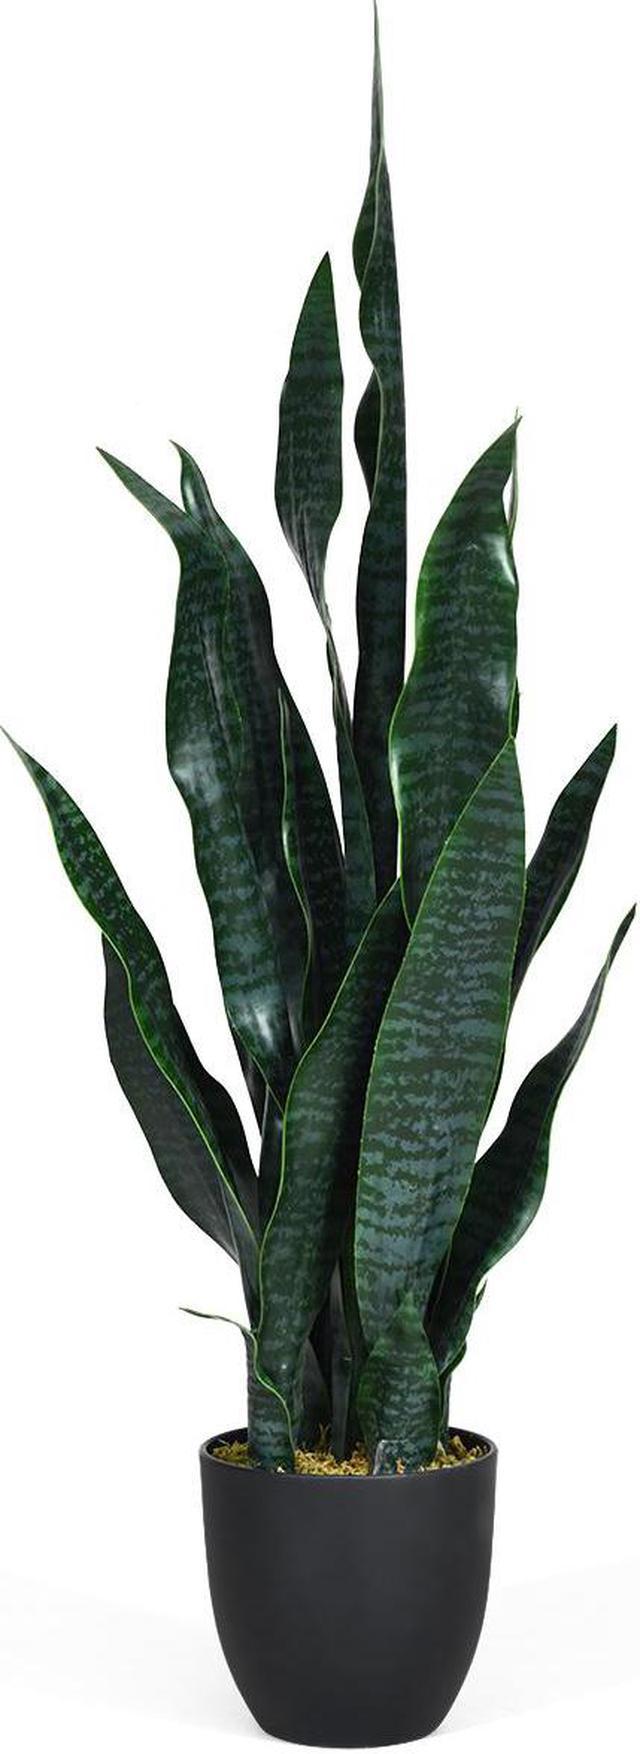 35.5 Indoor-Outdoor Decoration Fake Artificial Snake Plant